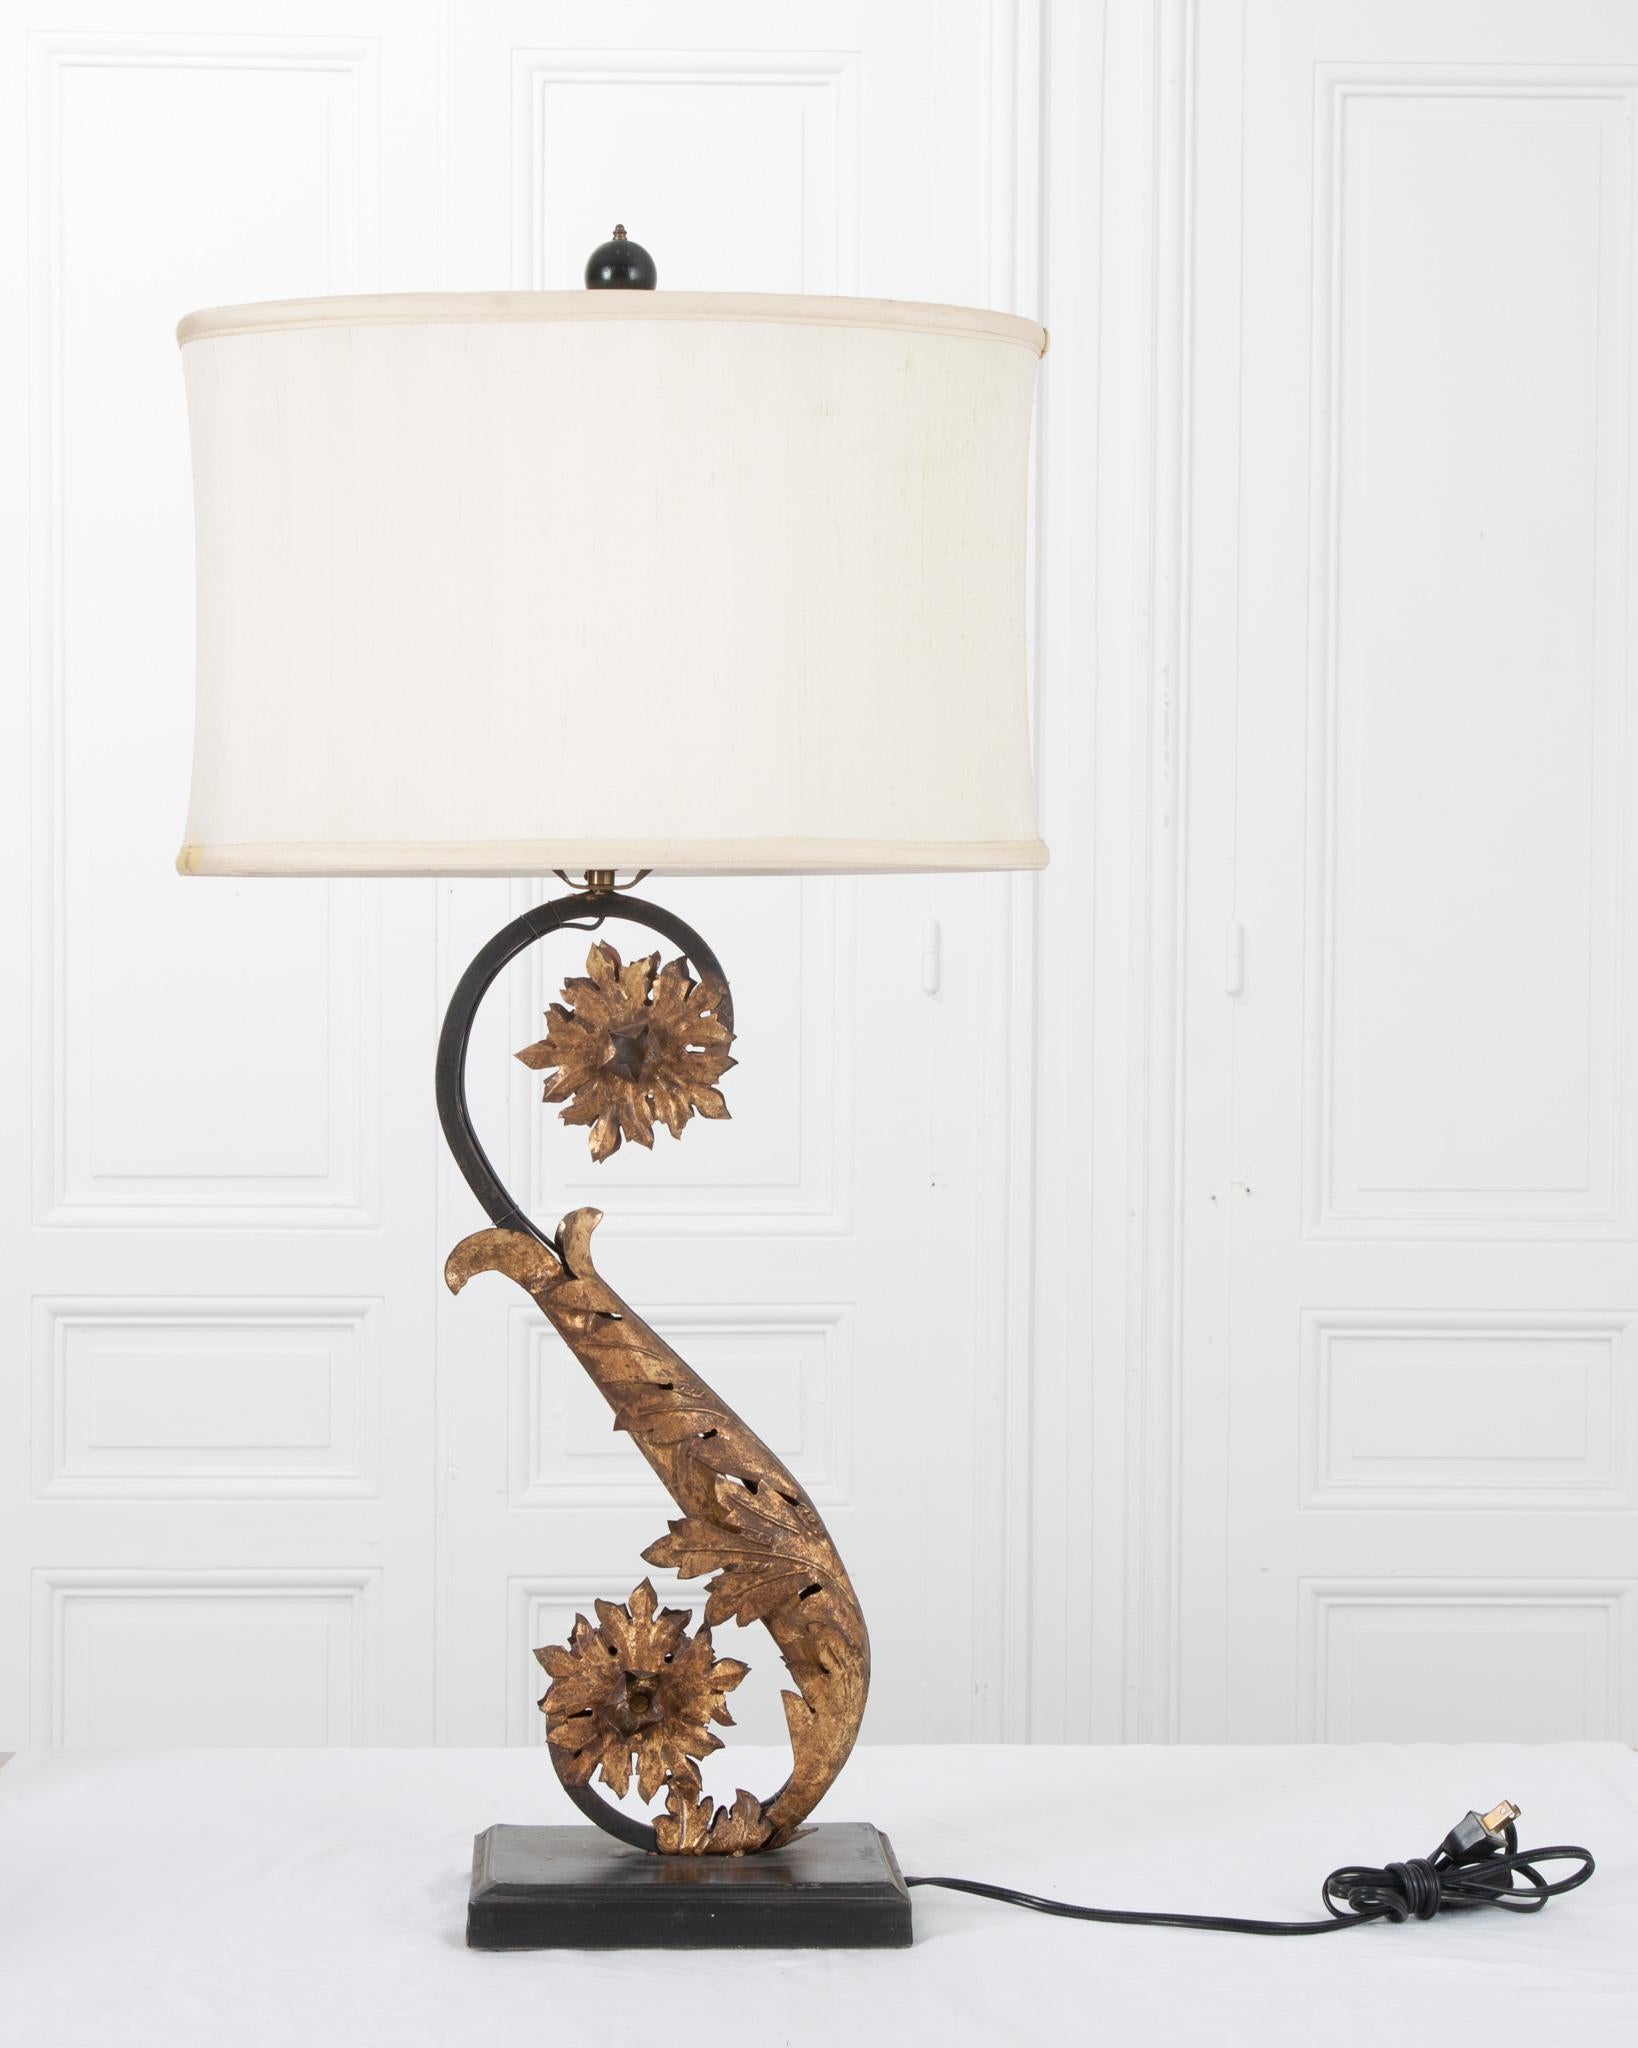 This elegant Italian reproduction lamp blends perfectly with modern or antique home decor! Fit with a custom oval shaped silk shade. The lamp features detailed gilt leaves and flowers wrapped around the scrolling ‘S’ shaped metal body. The metal